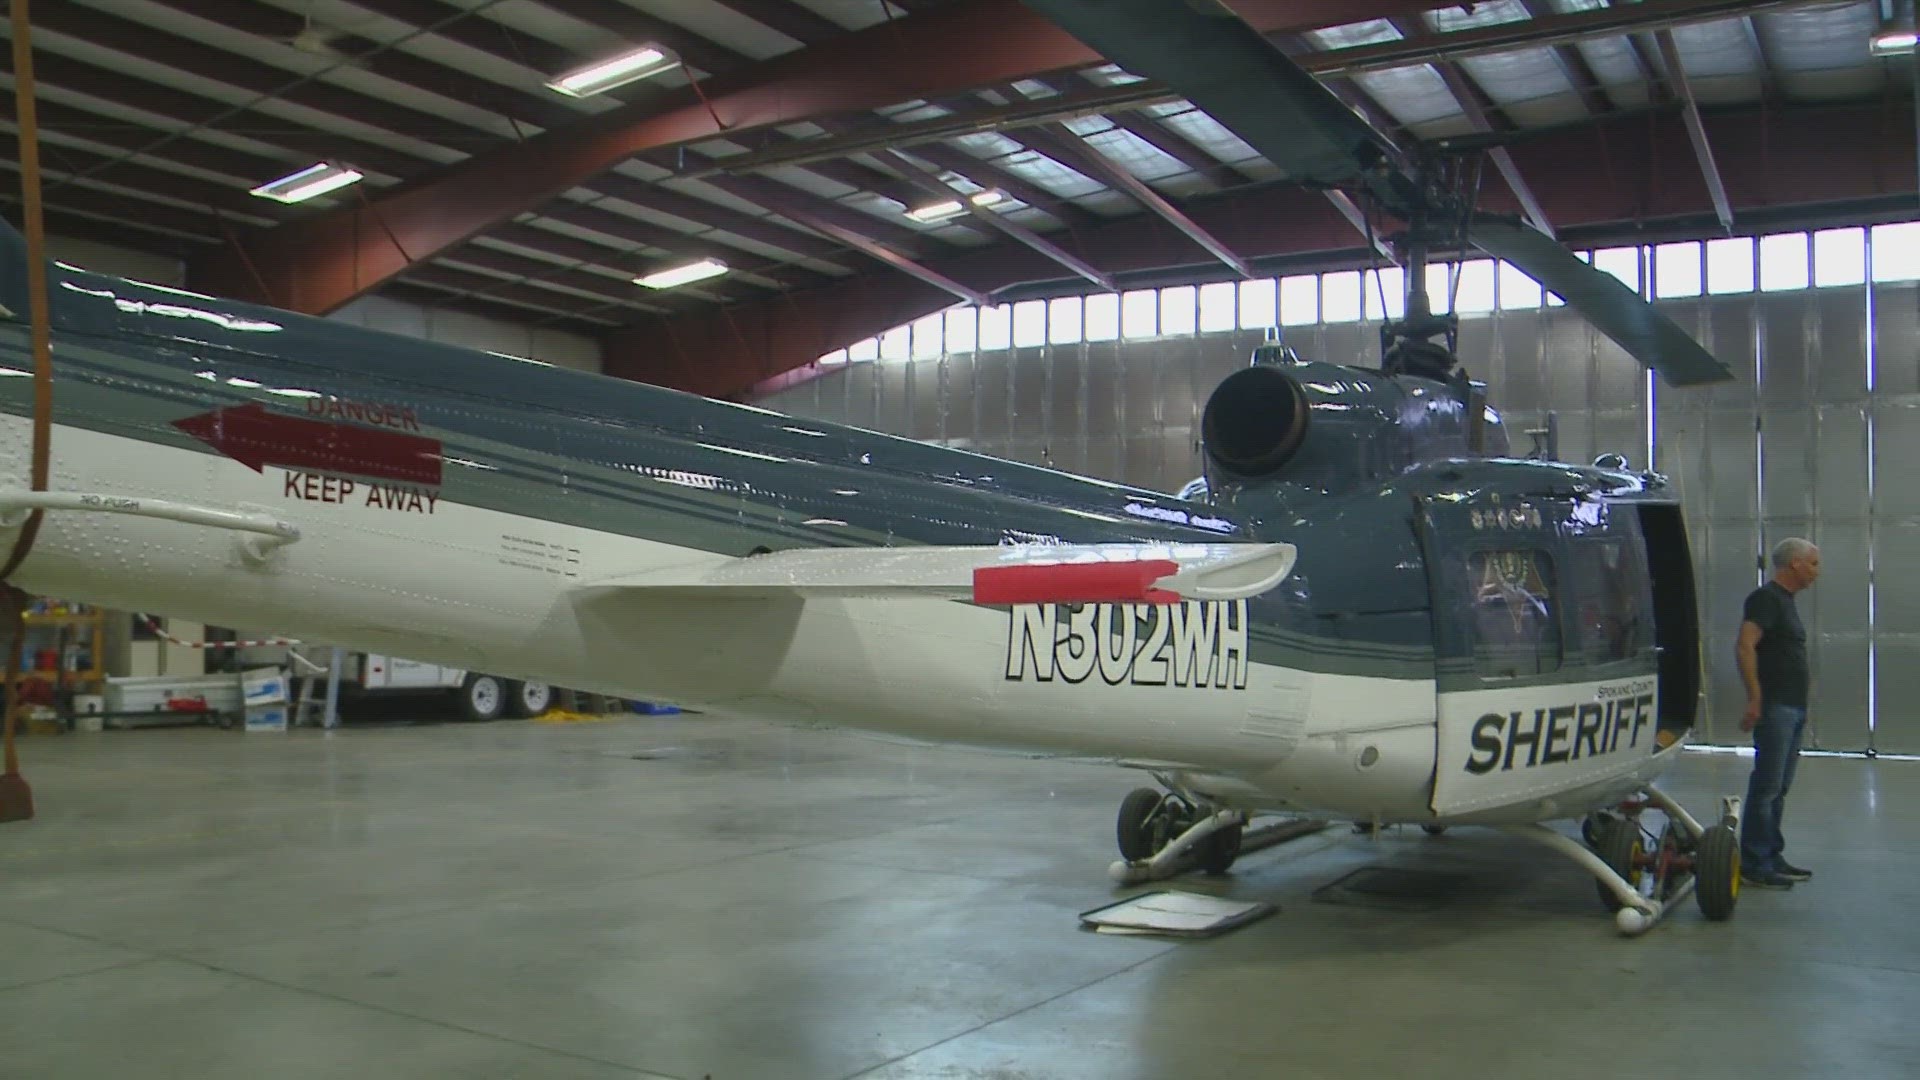 The Spokane County Sheriff's Office is hoping to make approximately $1 million by auctioning off one of its search and rescue helicopters.